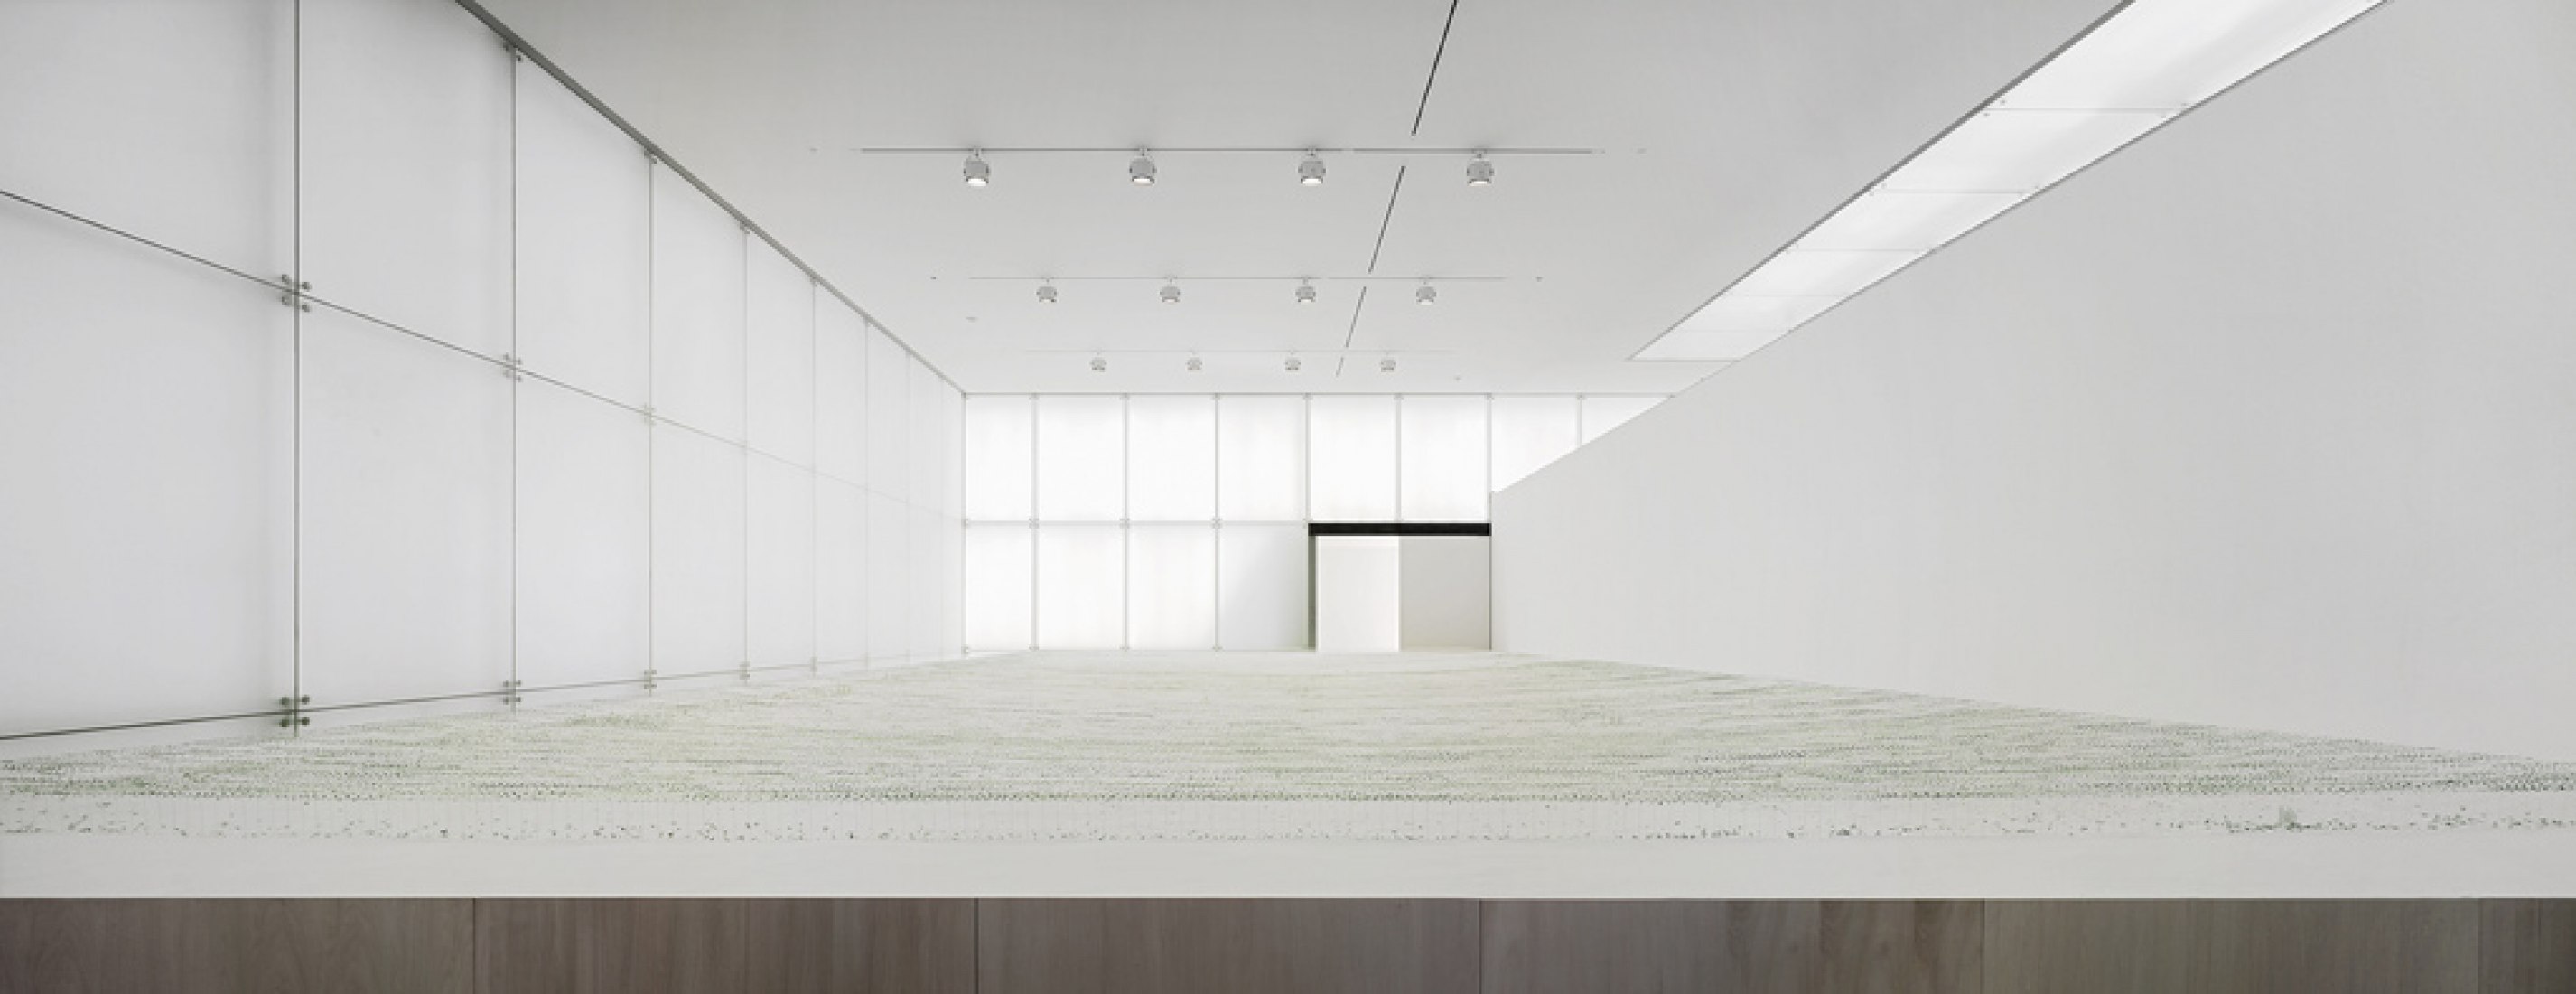 JUNYA ISHIGAMI. How small? How vast? How archItecture grows? | The ...